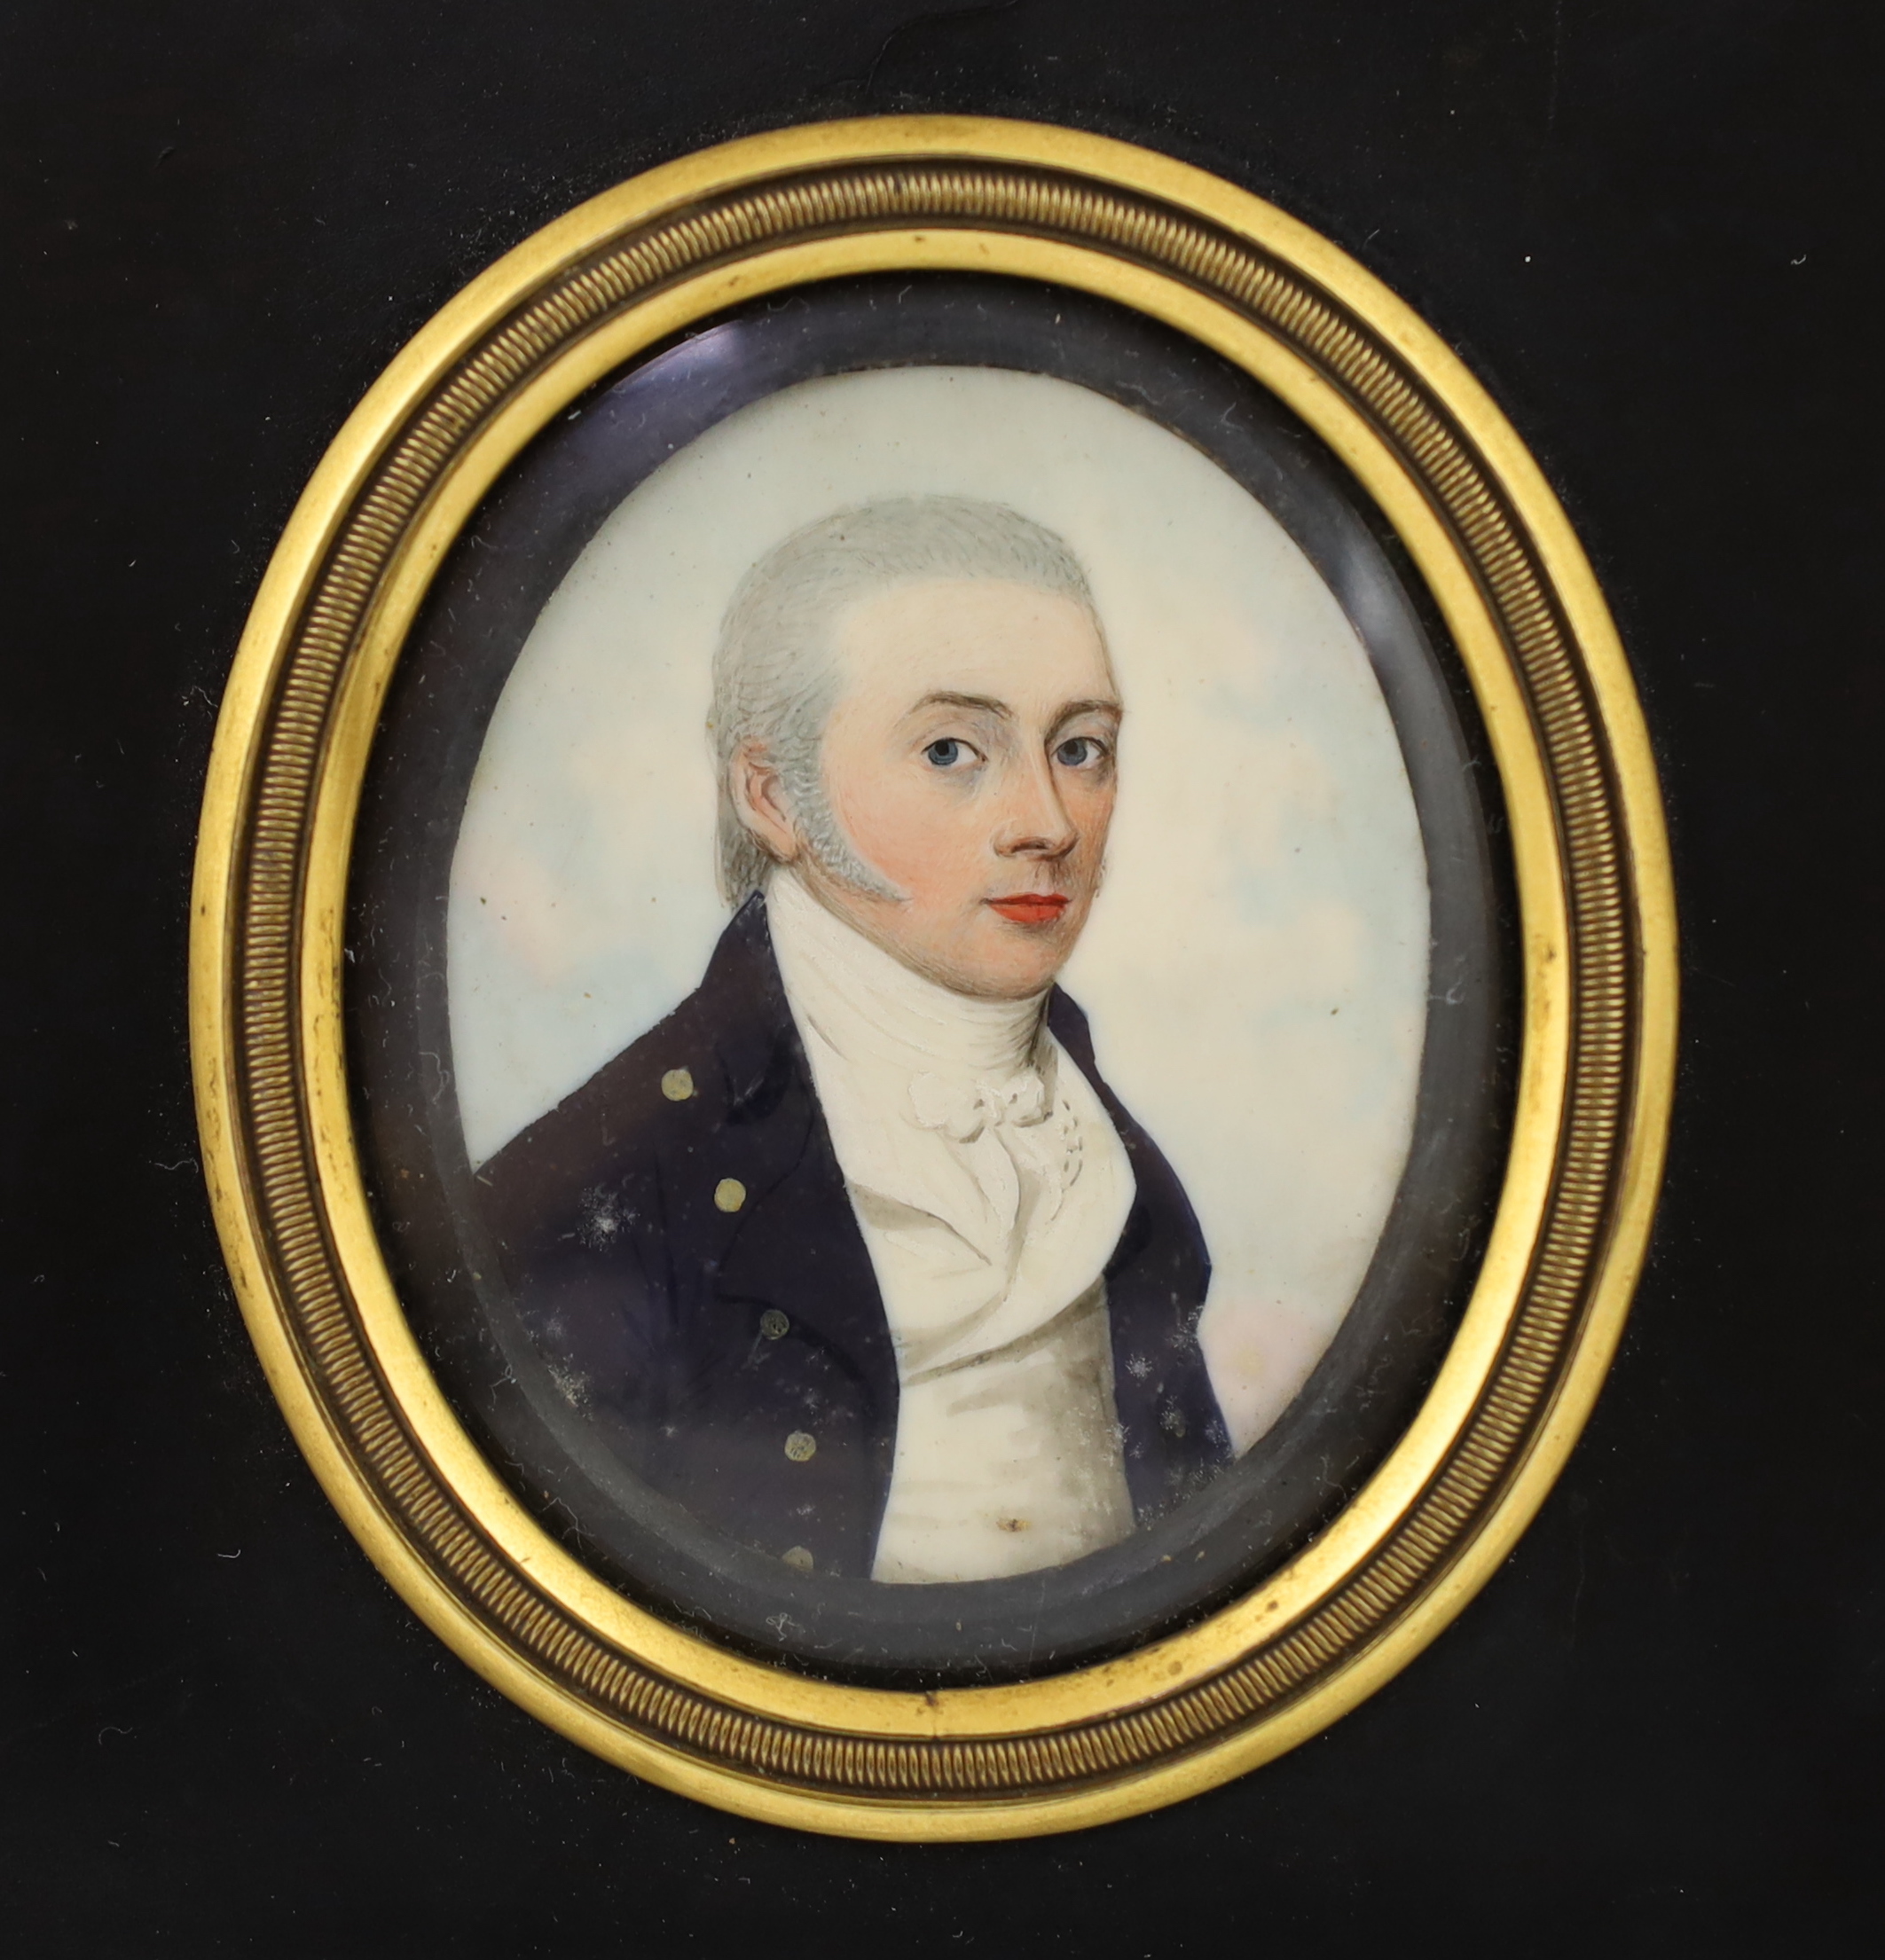 Frederick Buck (Irish, 1771-1840), Portrait miniature of a gentleman, watercolour on ivory, 5.7 x 4.7cm. CITES Submission reference G6EYRN5D